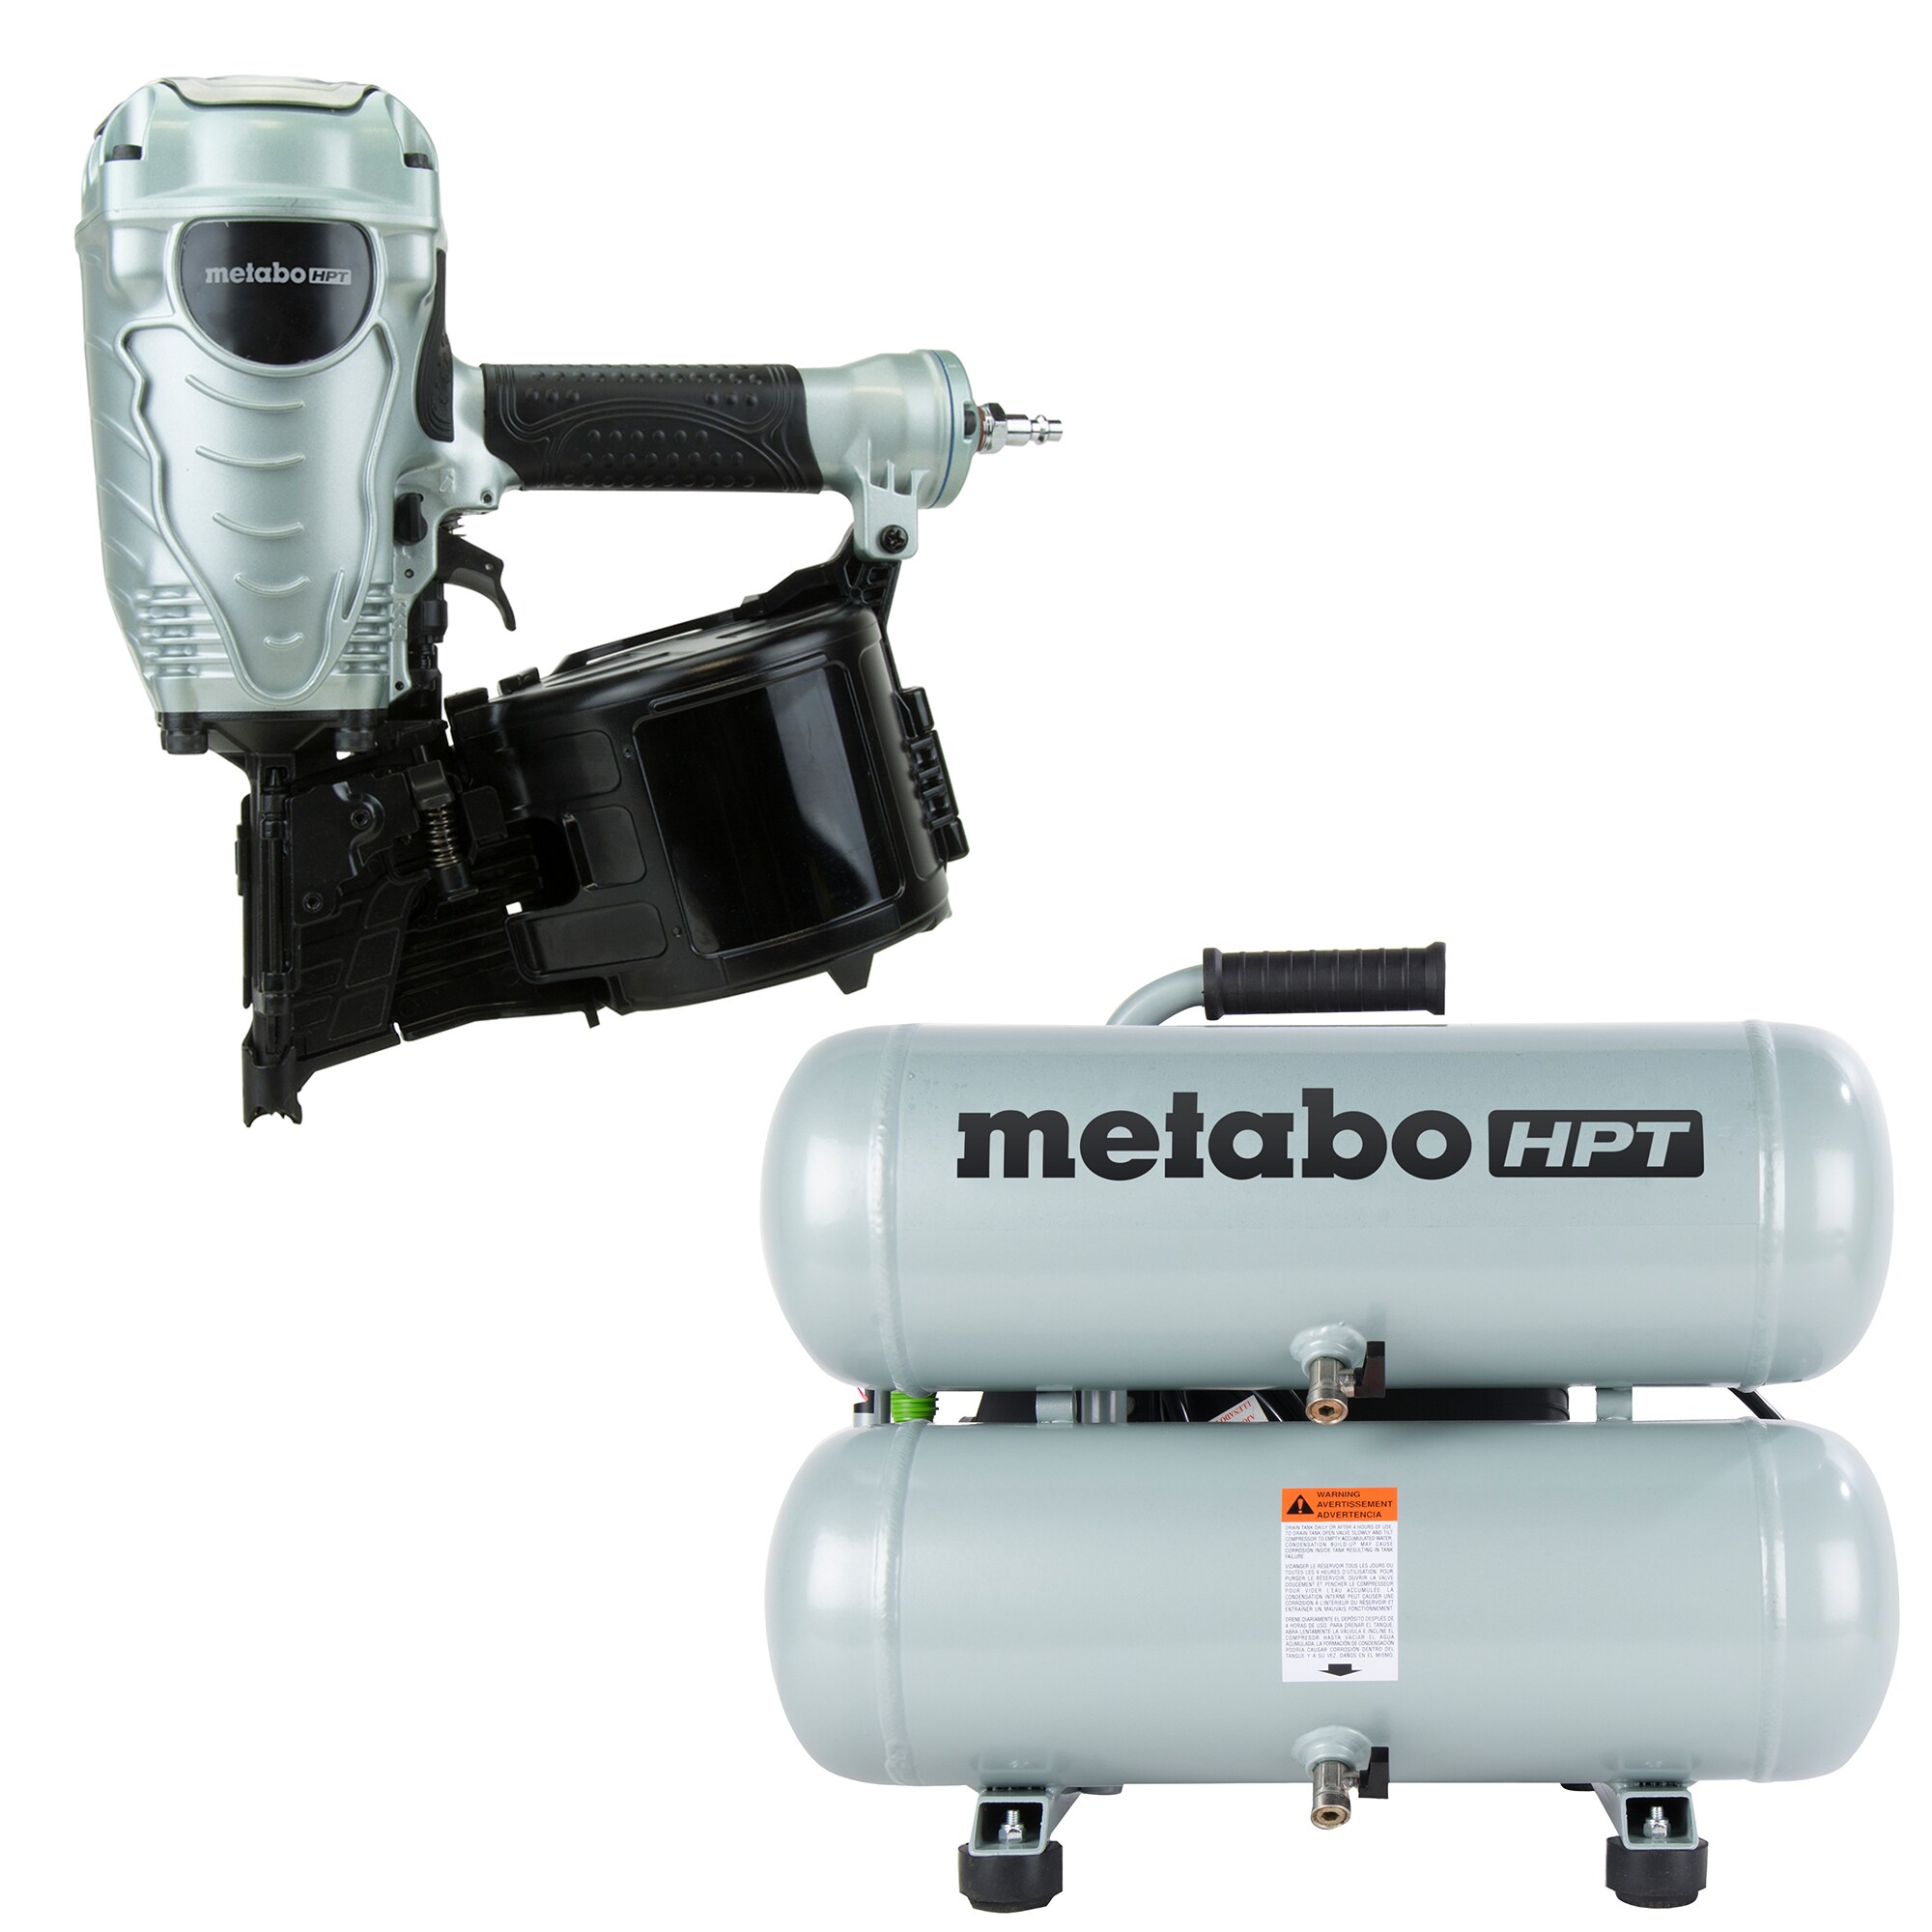 Metabo HPT 15-Degree Pneumatic Framing Nailer with 4-Gallon Single Stage Portable Electric Twin Stack Air Compressor